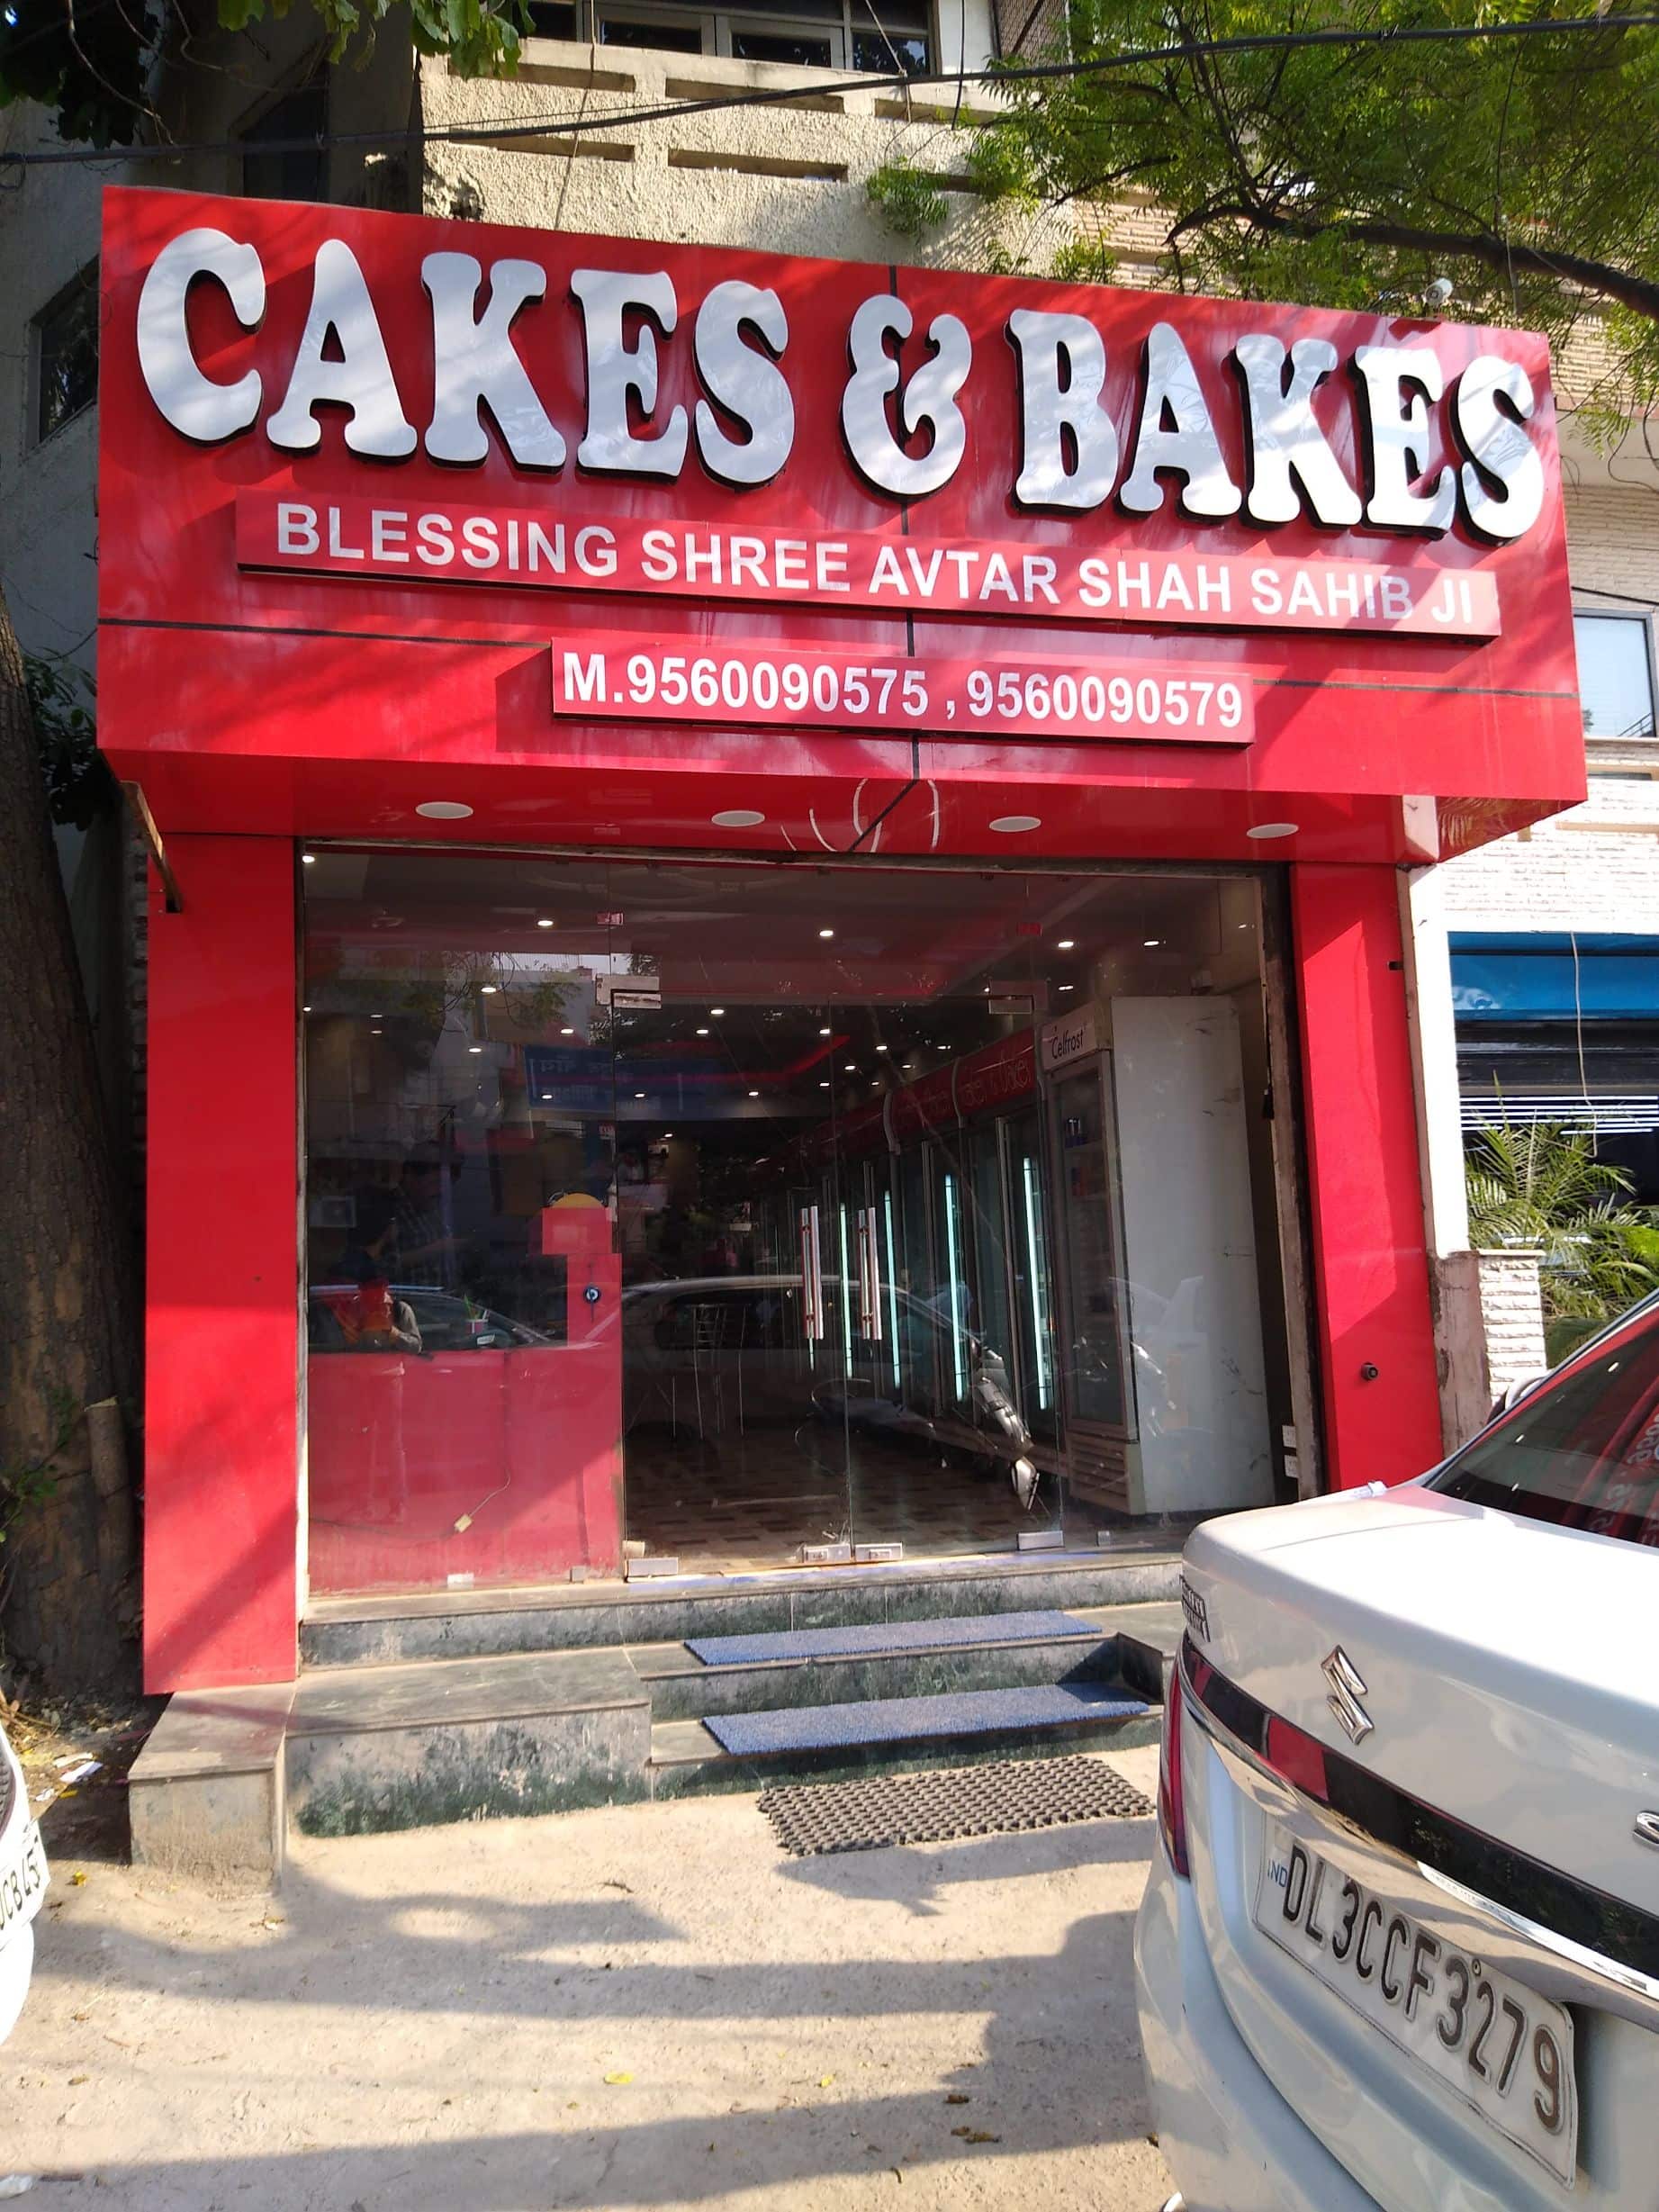 Get Instant Discount of 10% at Cake Desire, DLF Phase - 3, Gurgaon | Dineout